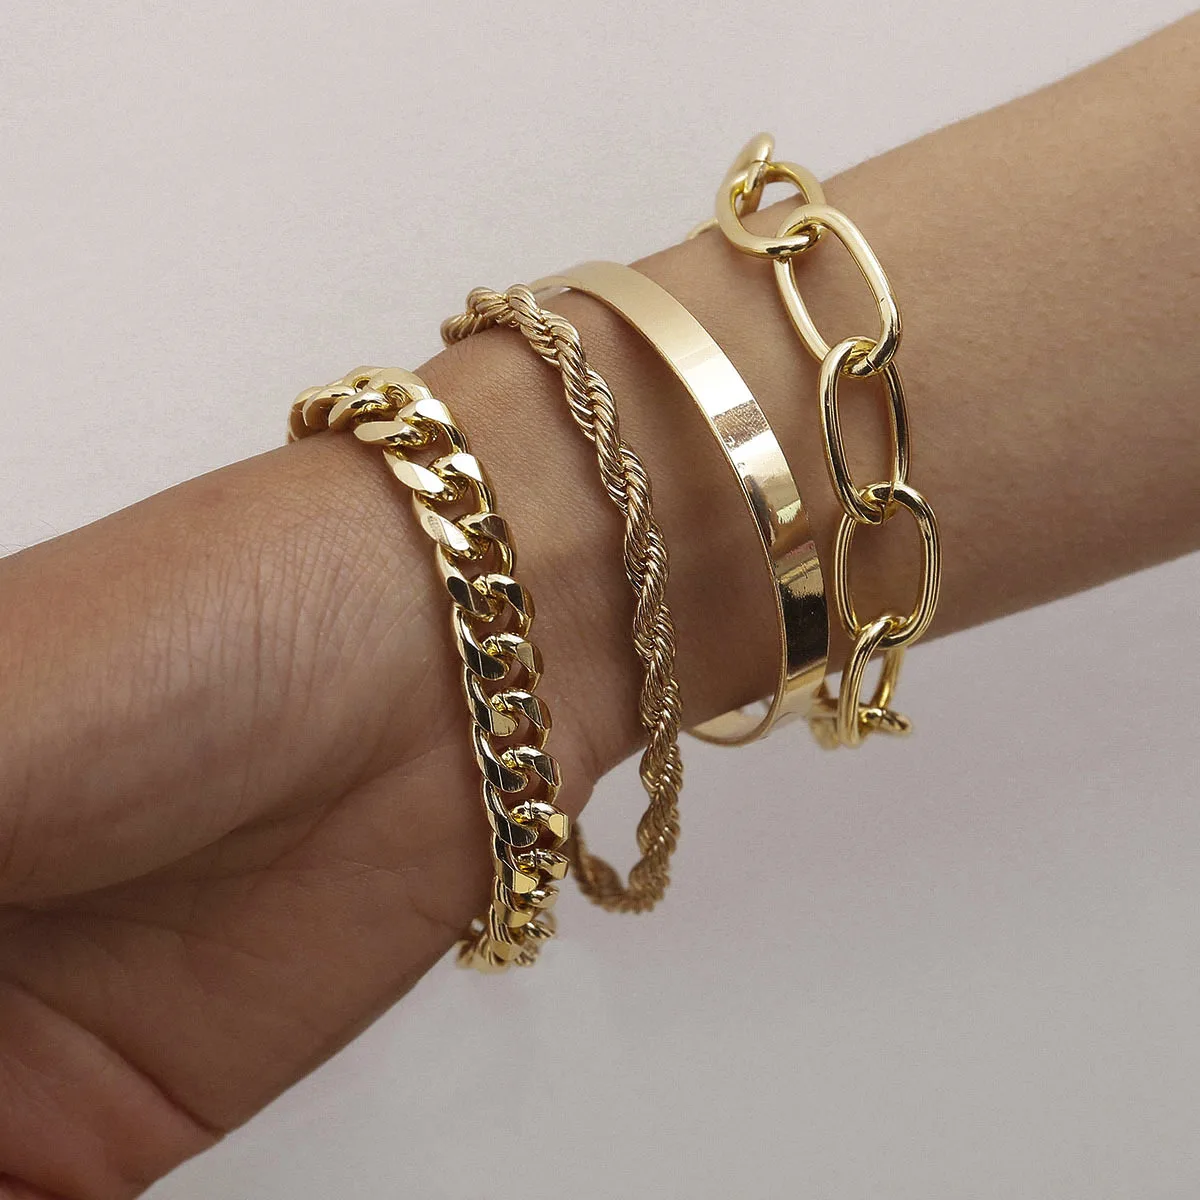 Gold Chain Bracelet Sets For Women Girls 14K Gold Plated Dainty Link  Paperclip Bracelets Stake Adjustable Layered Metal Link - Buy Gold Chain  Bracelet Sets For Women Girls 14K Gold Plated Dainty